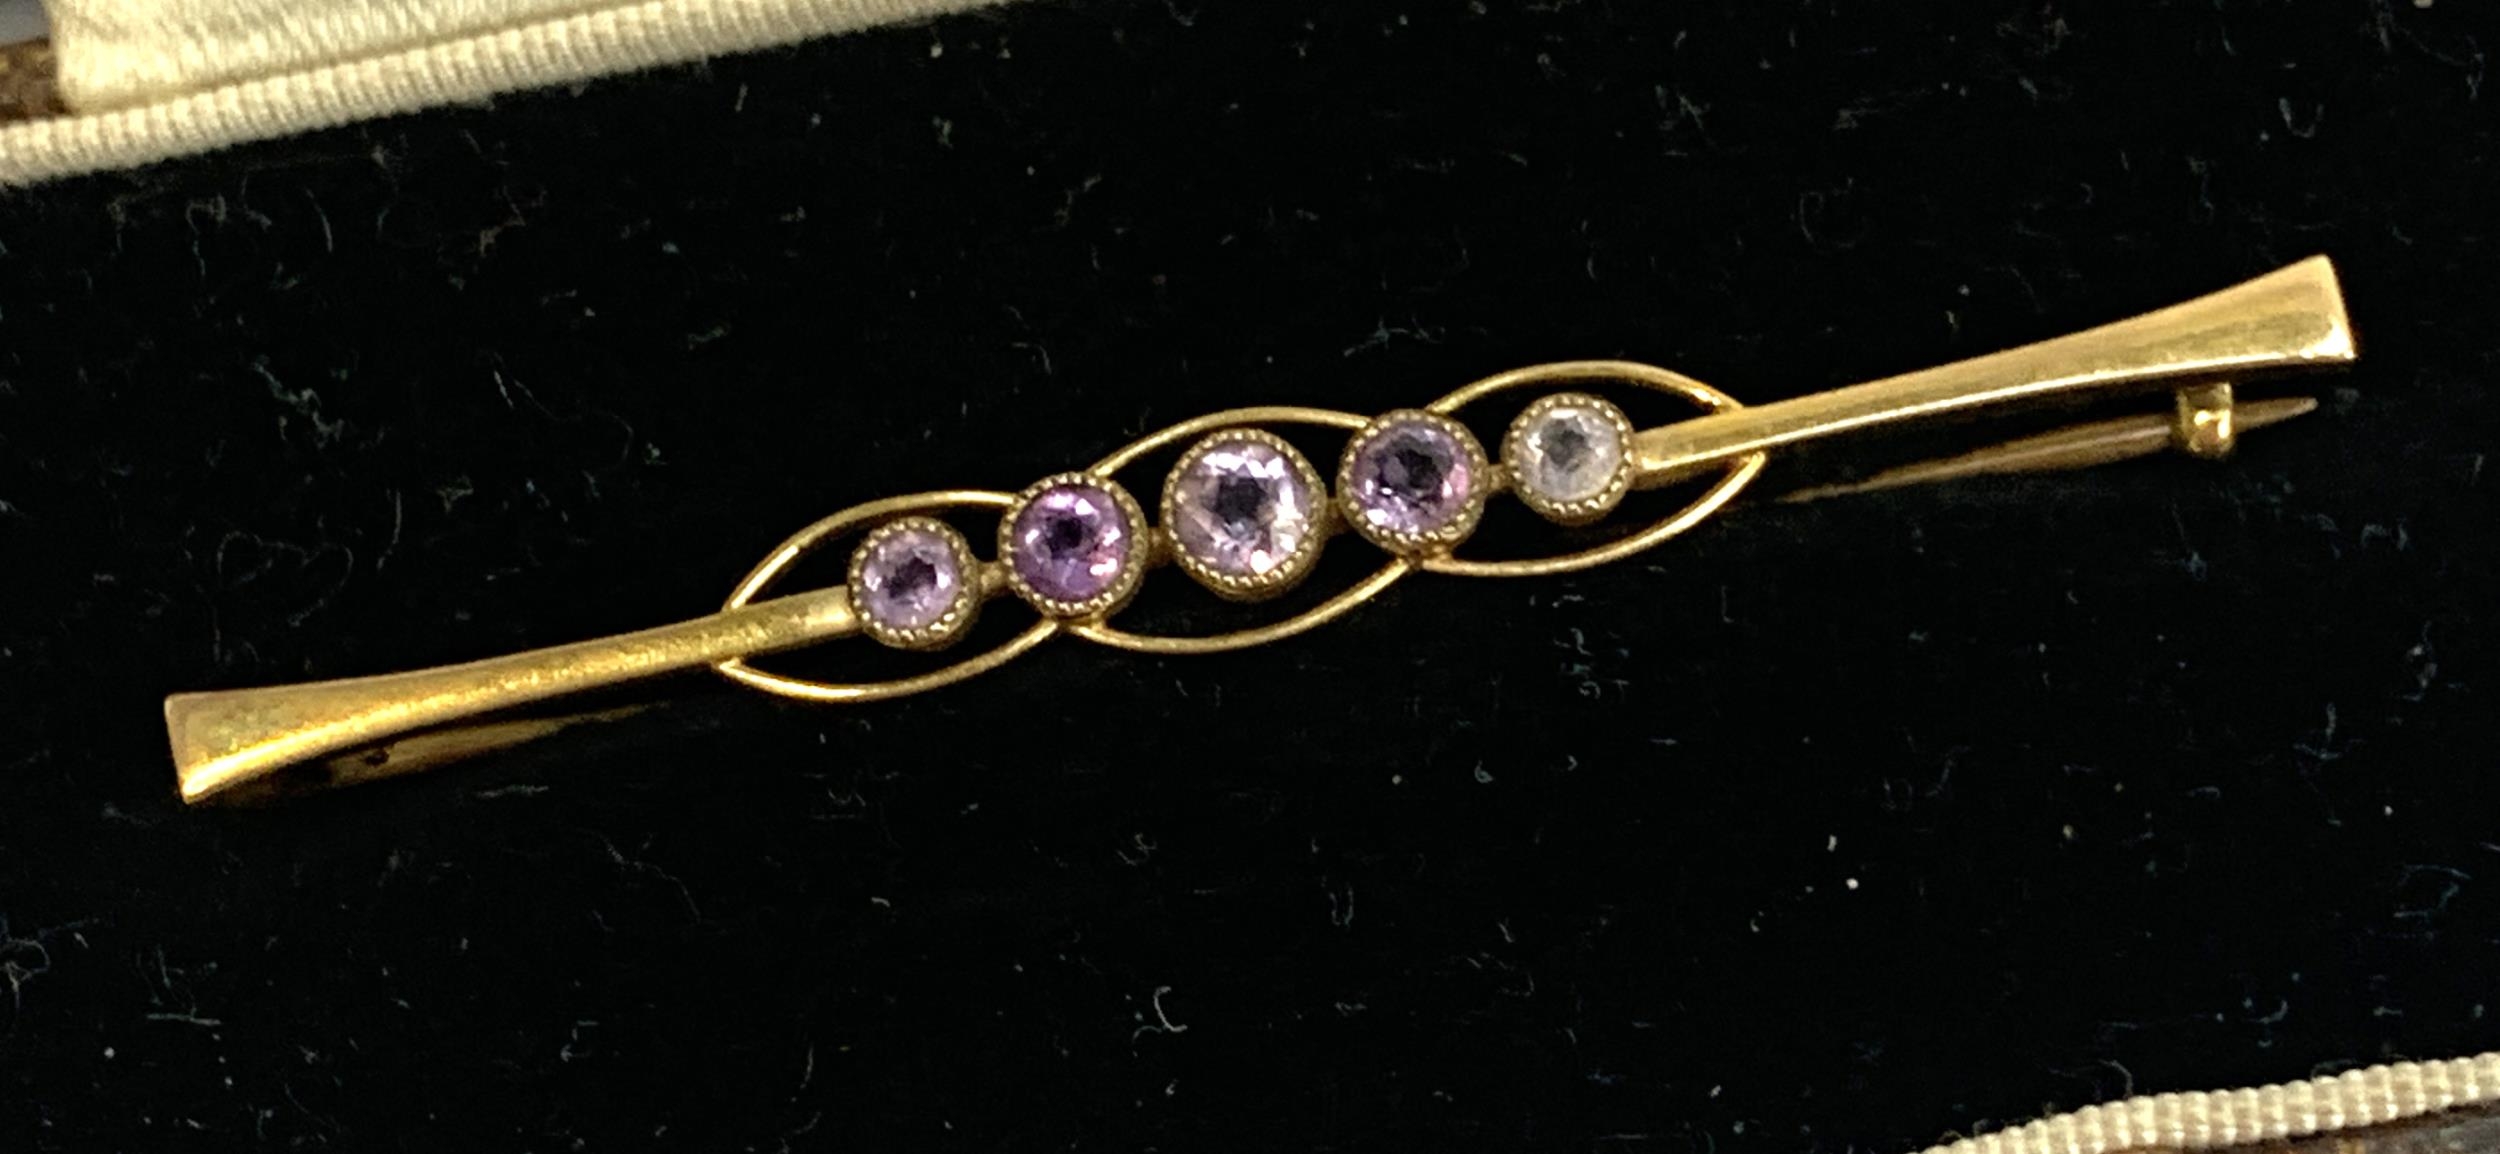 A 9ct gold Edwardian bar brooch set with five amethysts in milgrain settings, 5cmL, 1.9g, in box - Image 2 of 2